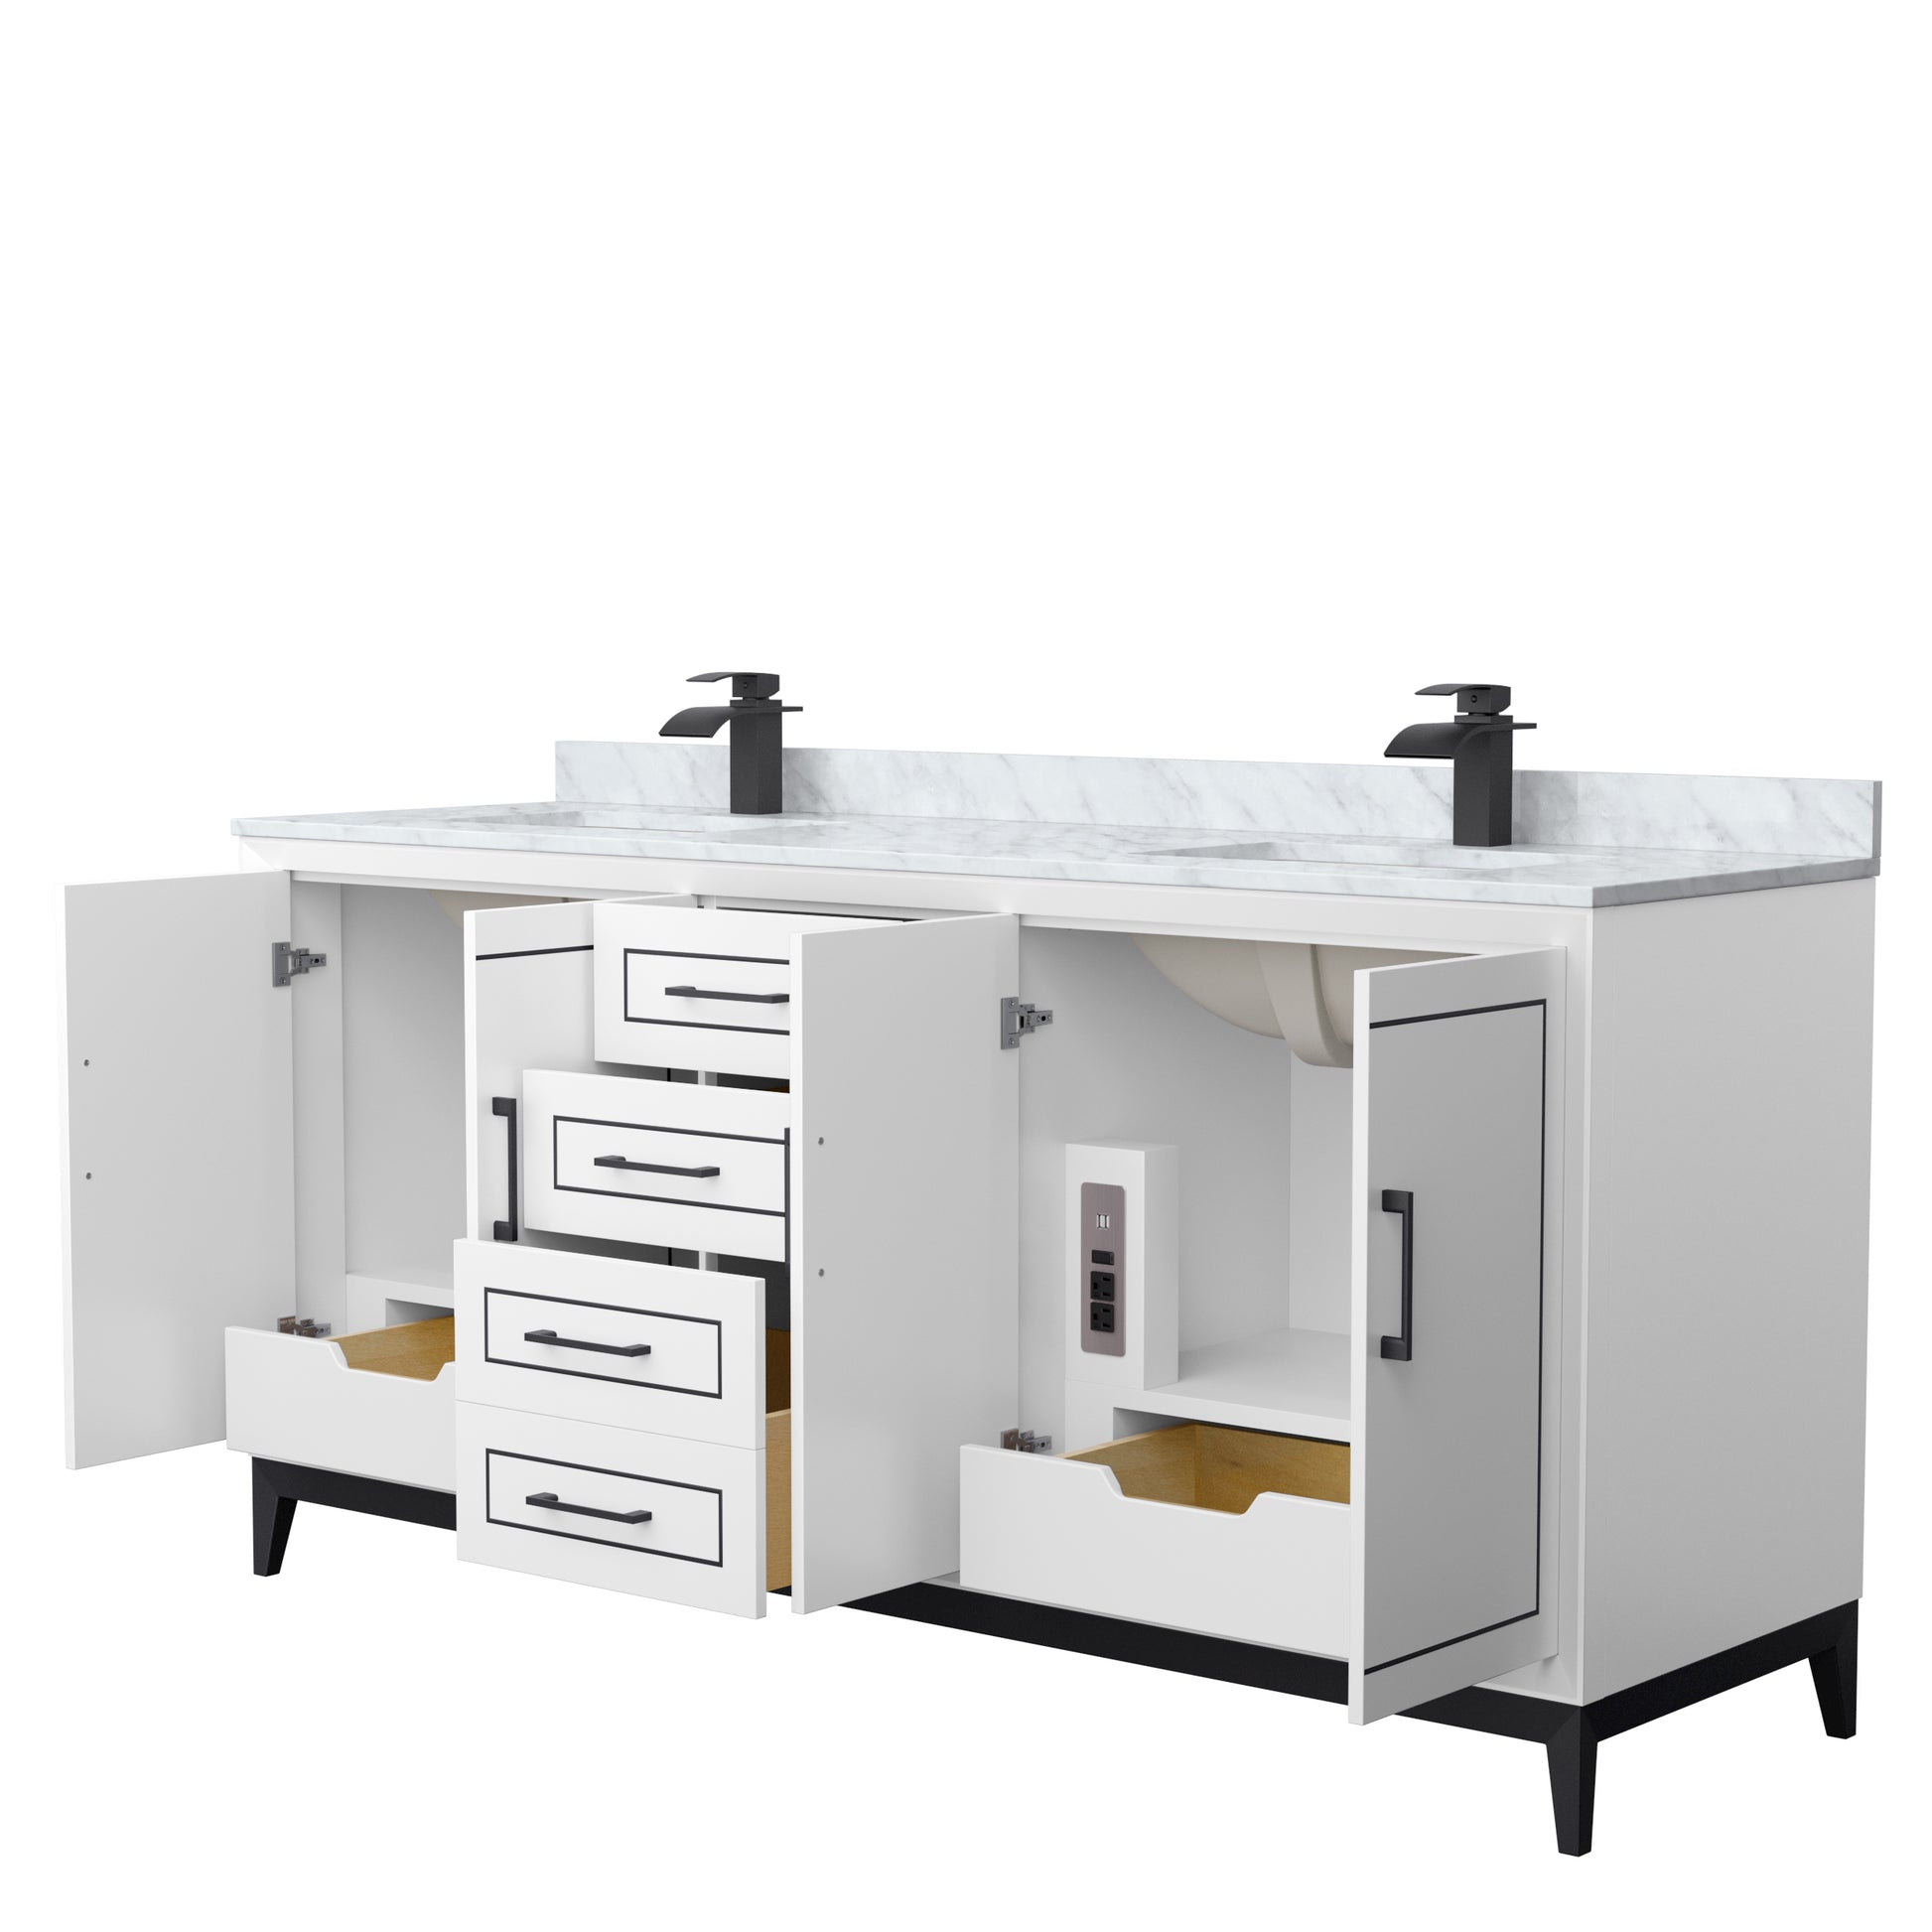 
  
  Marlena 72" Double Sink Vanity with White Carrara Marble, Undermount Square Sink, Optional Trim
  
